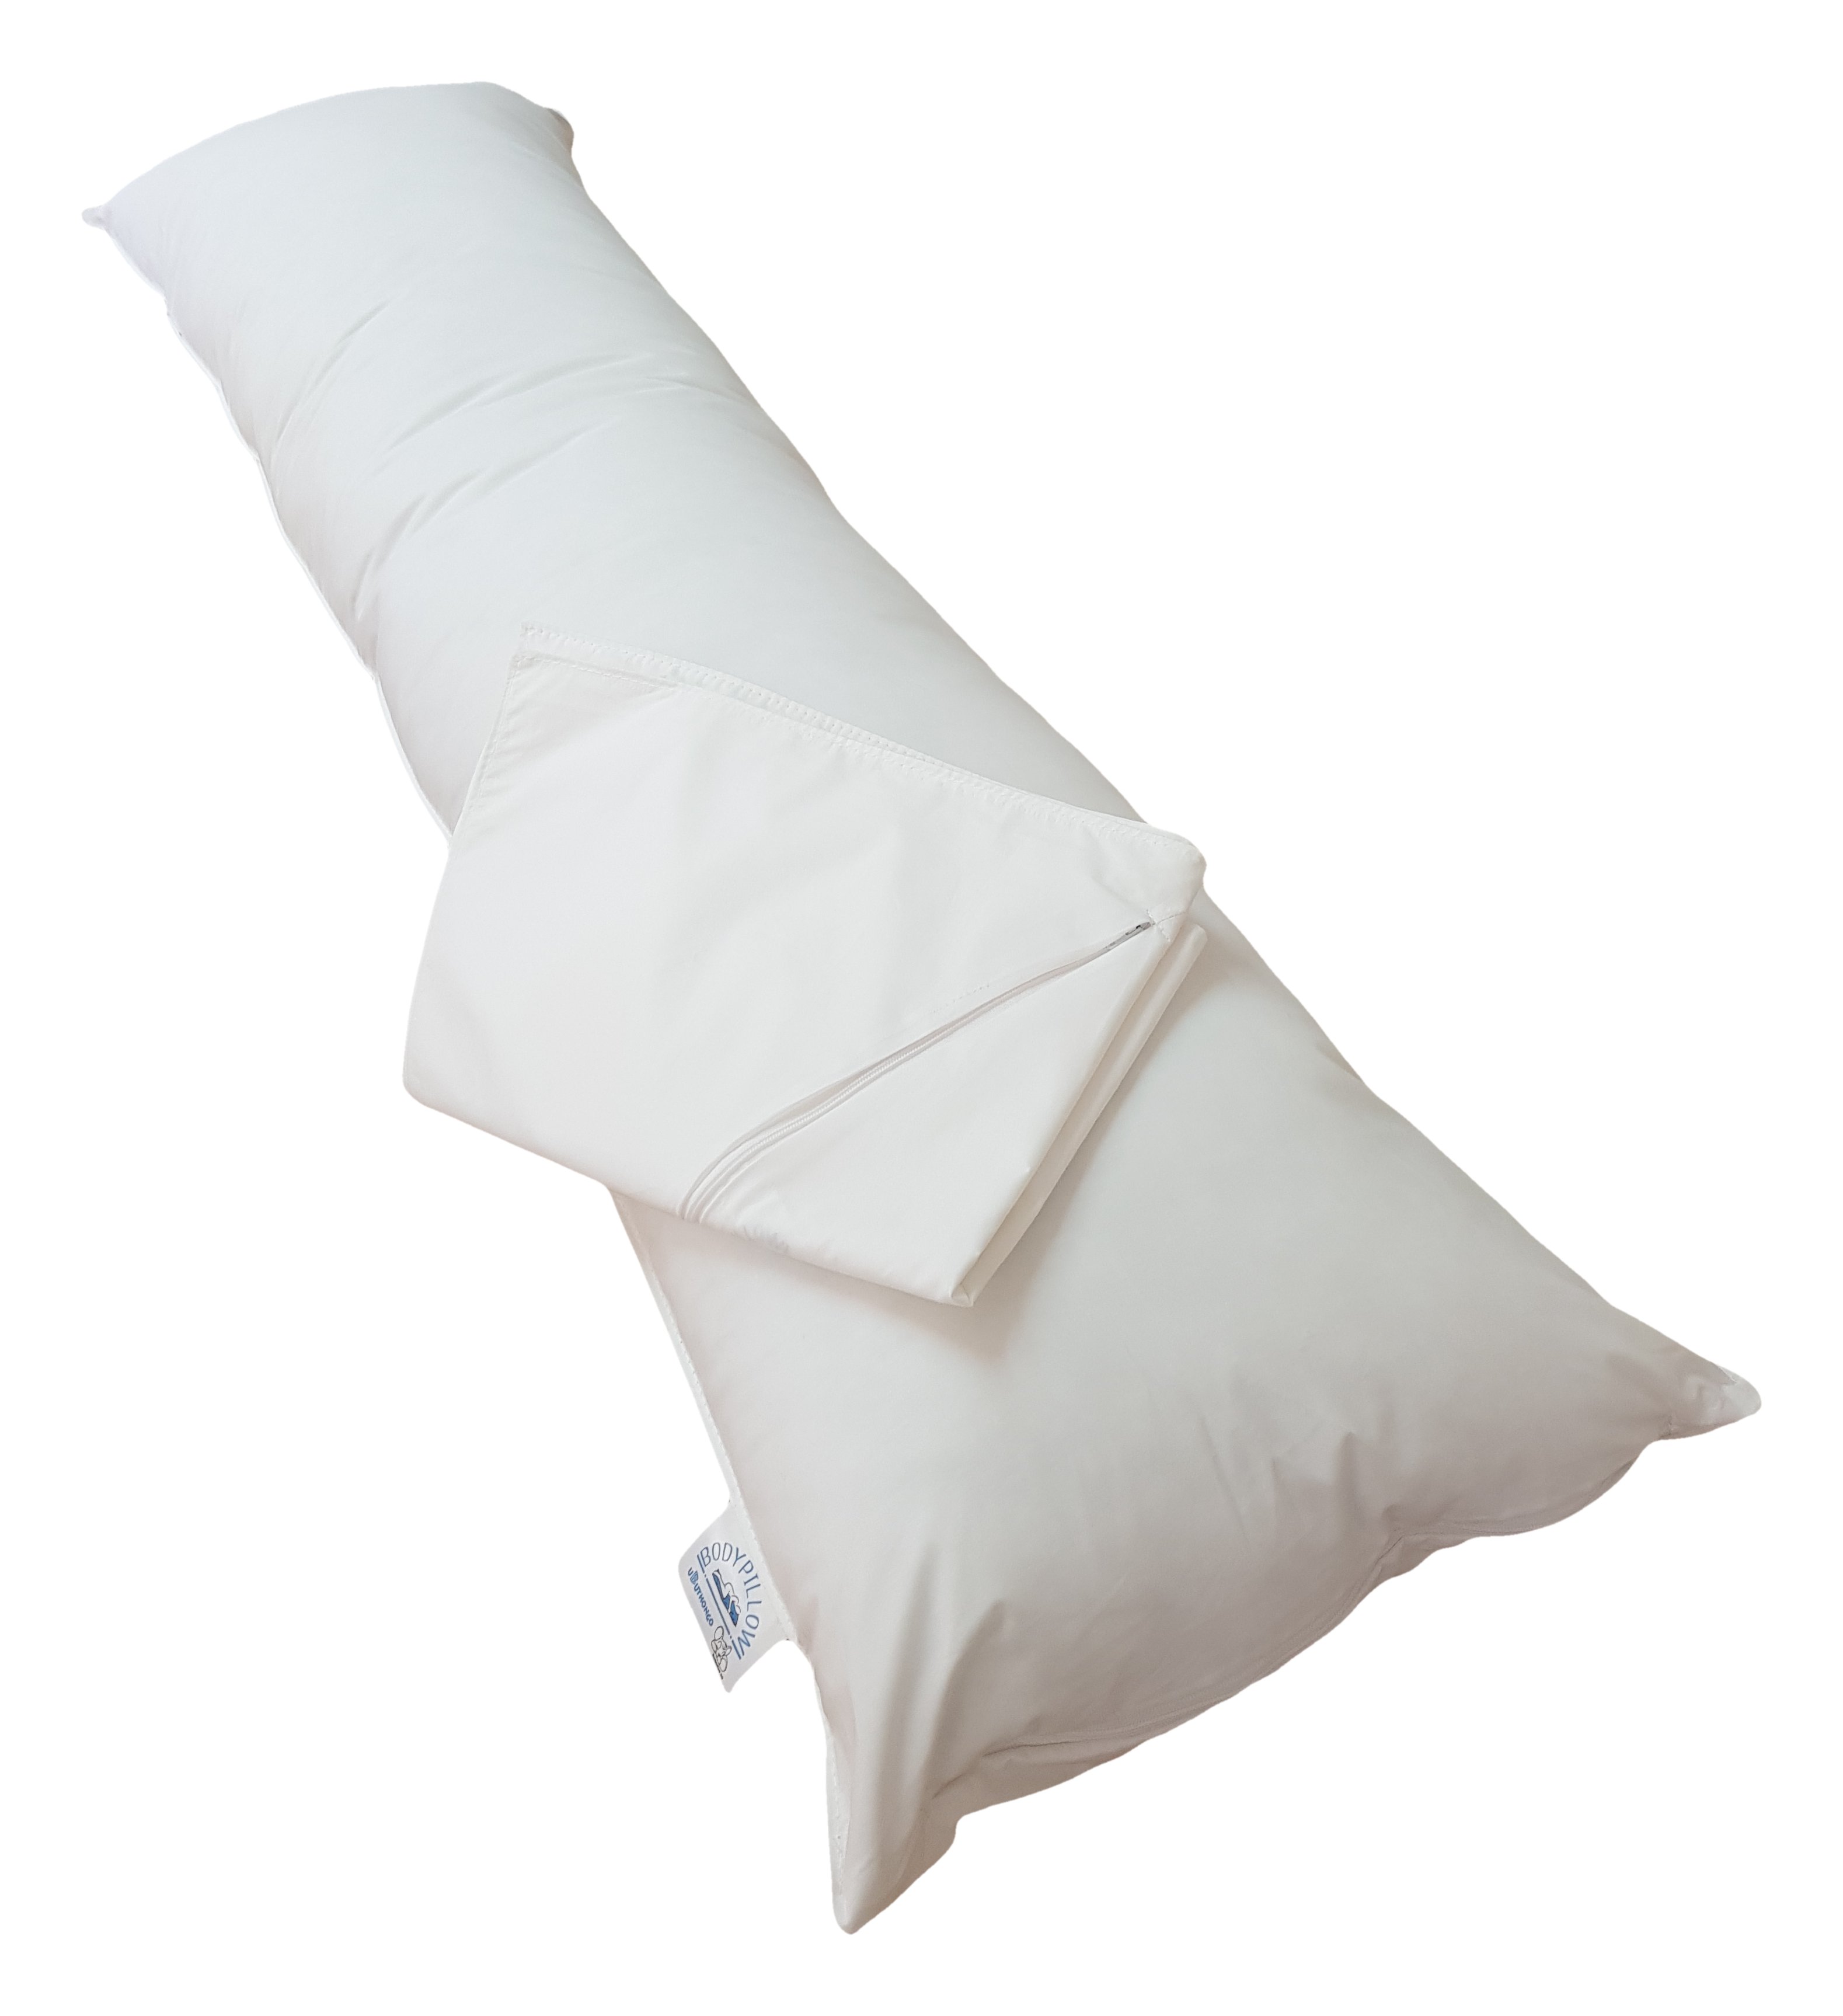 [ Medi-Line Ubuntu - R599 ] This Bodypillow is manufactured entirely from T300 100% Pure Cotton Percale with Synthetic-Fibre filling. It makes a wonderful bedtime companion and will assist in keeping your spine aligned while you are resting.